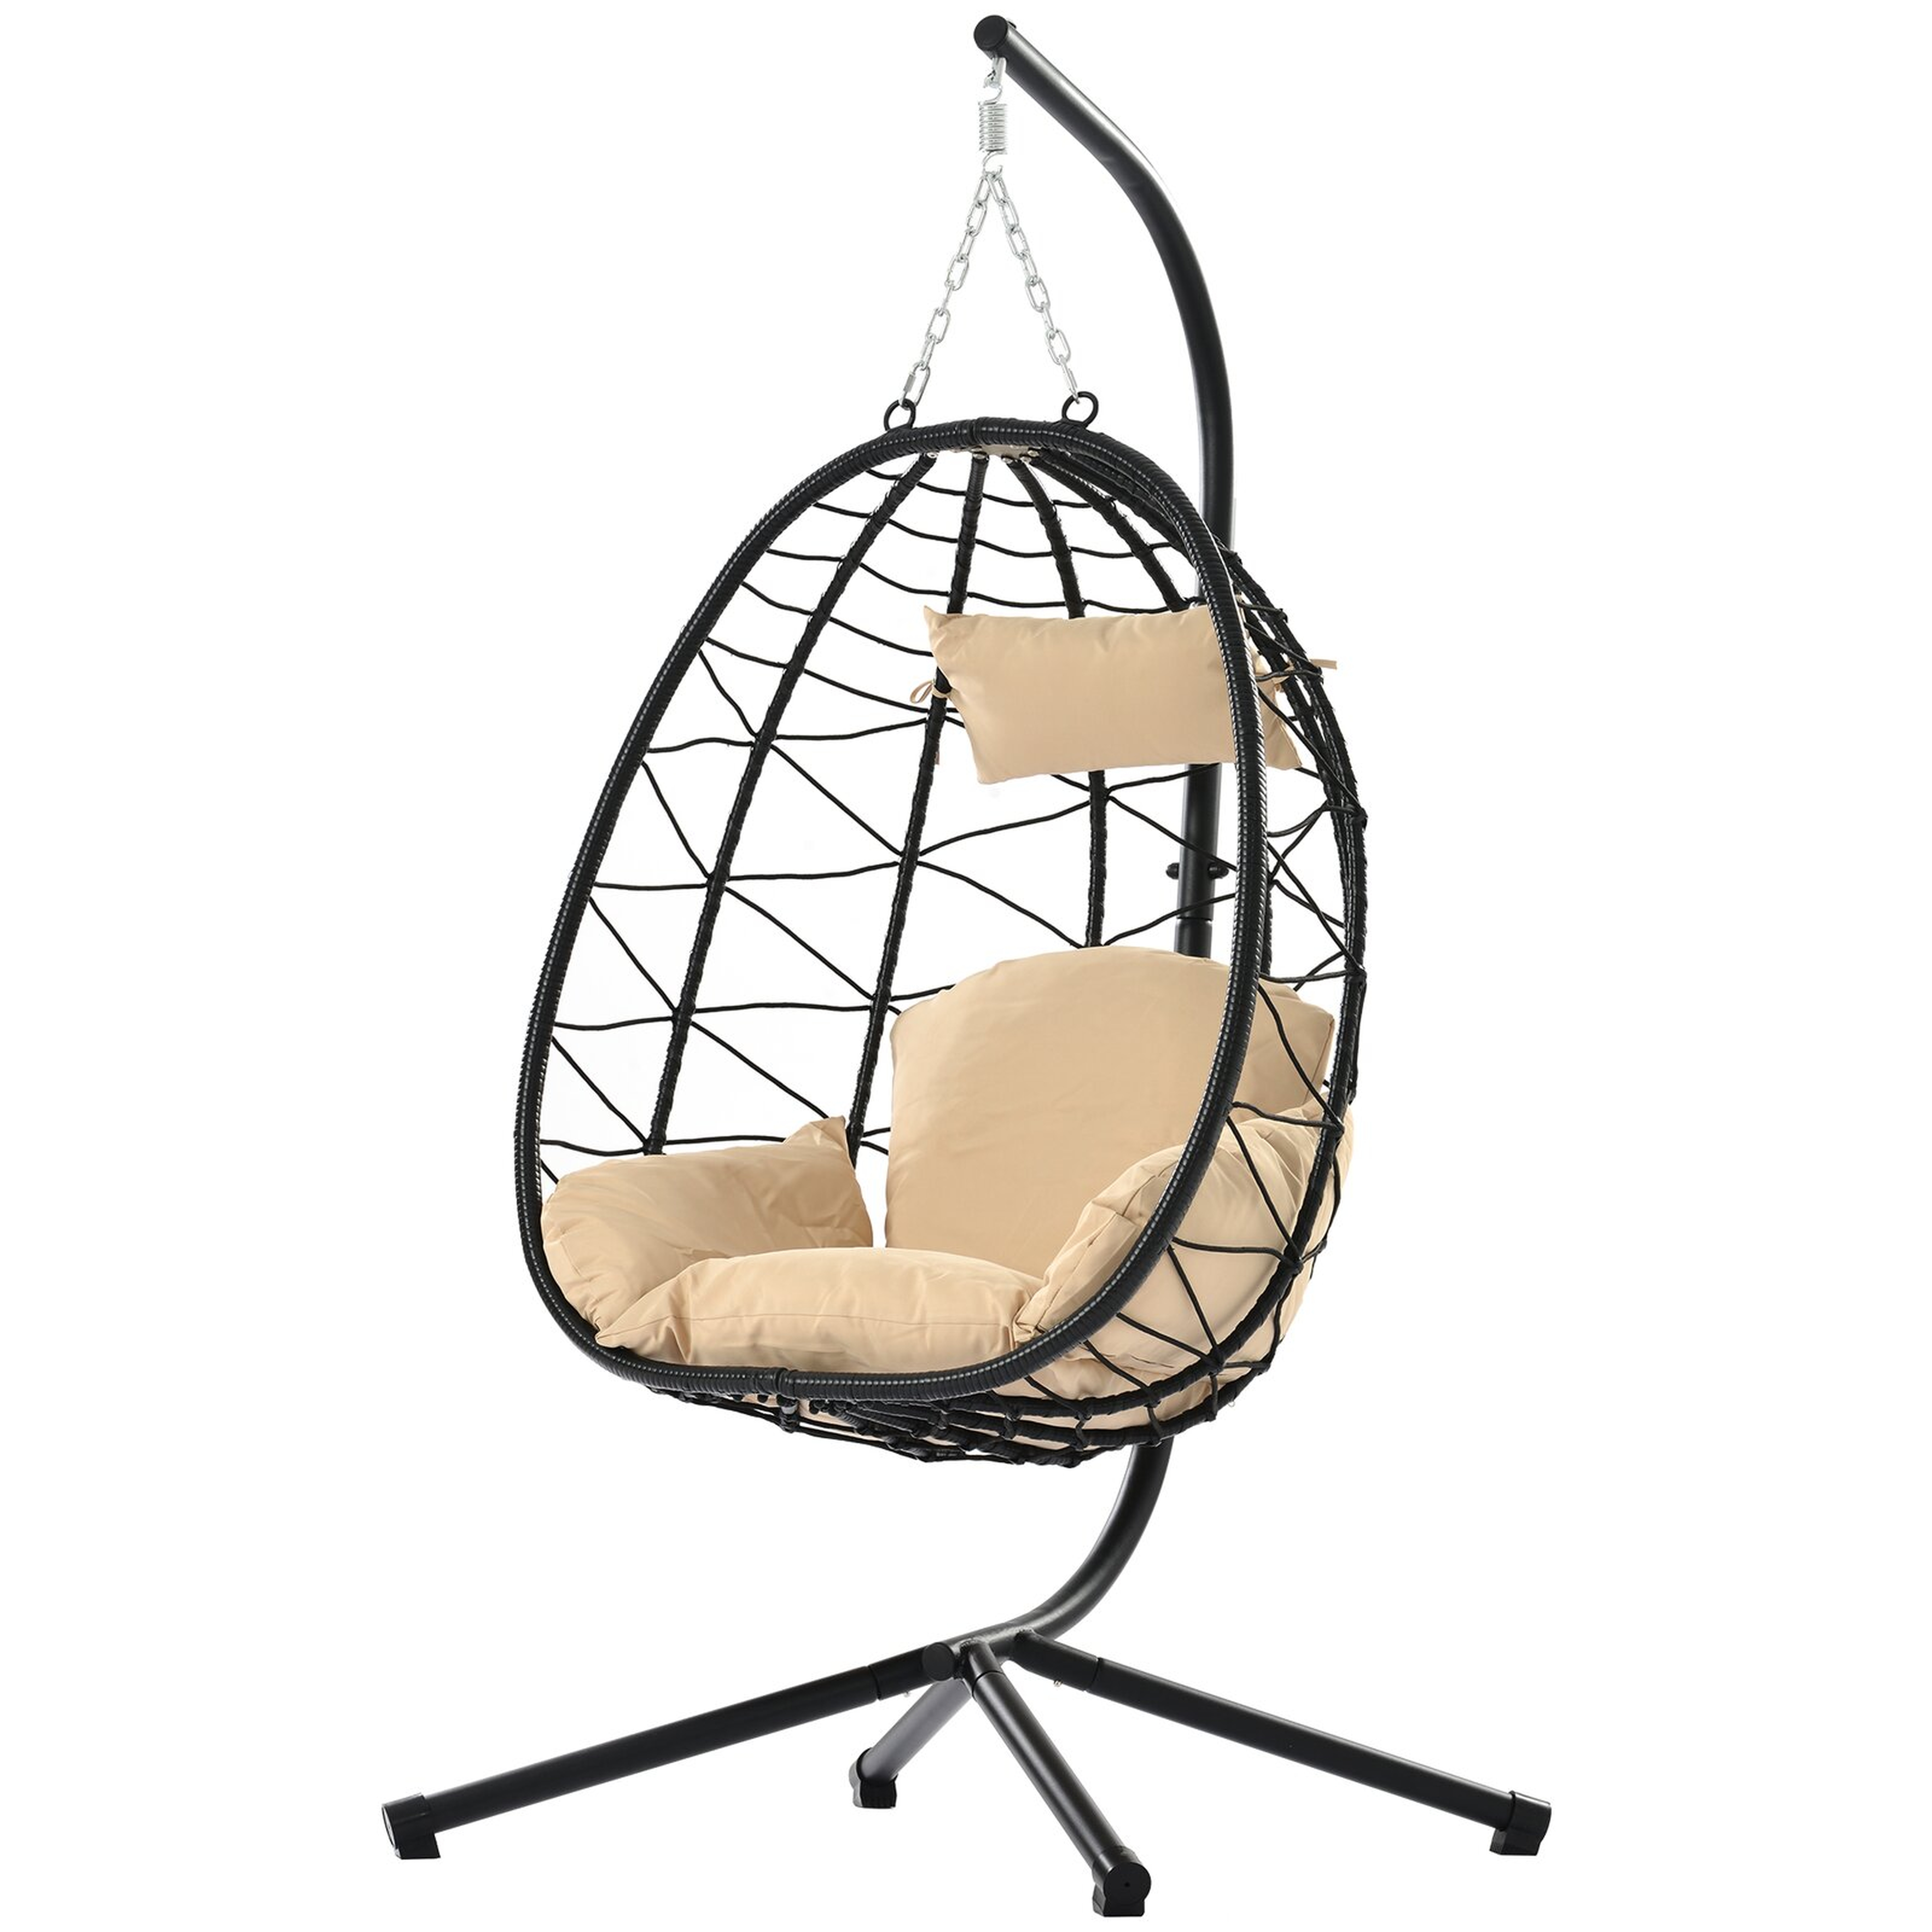 Egg Chair With Stand Indoor Outdoor Swing Chair Patio Wicker Hanging Egg Chair Hanging Basket Chair Hammock Chair With Stand For Bedroom Living Room Balcony - Wayfair